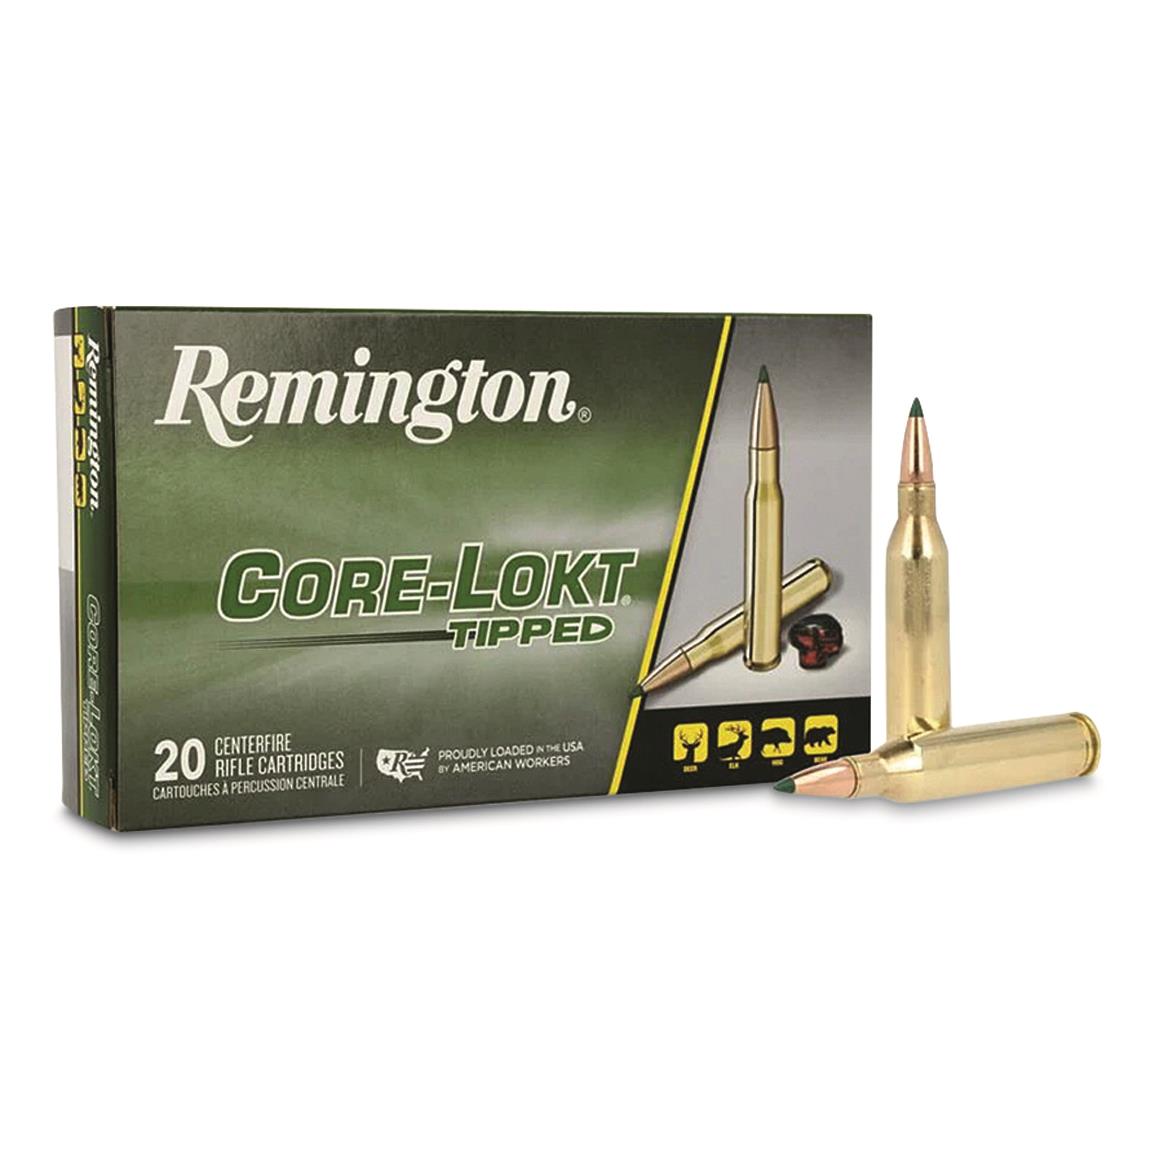 Remington Core-Lokt Tipped, .243 Winchester, Polymer Tip, 95 Grain, 20 Rounds